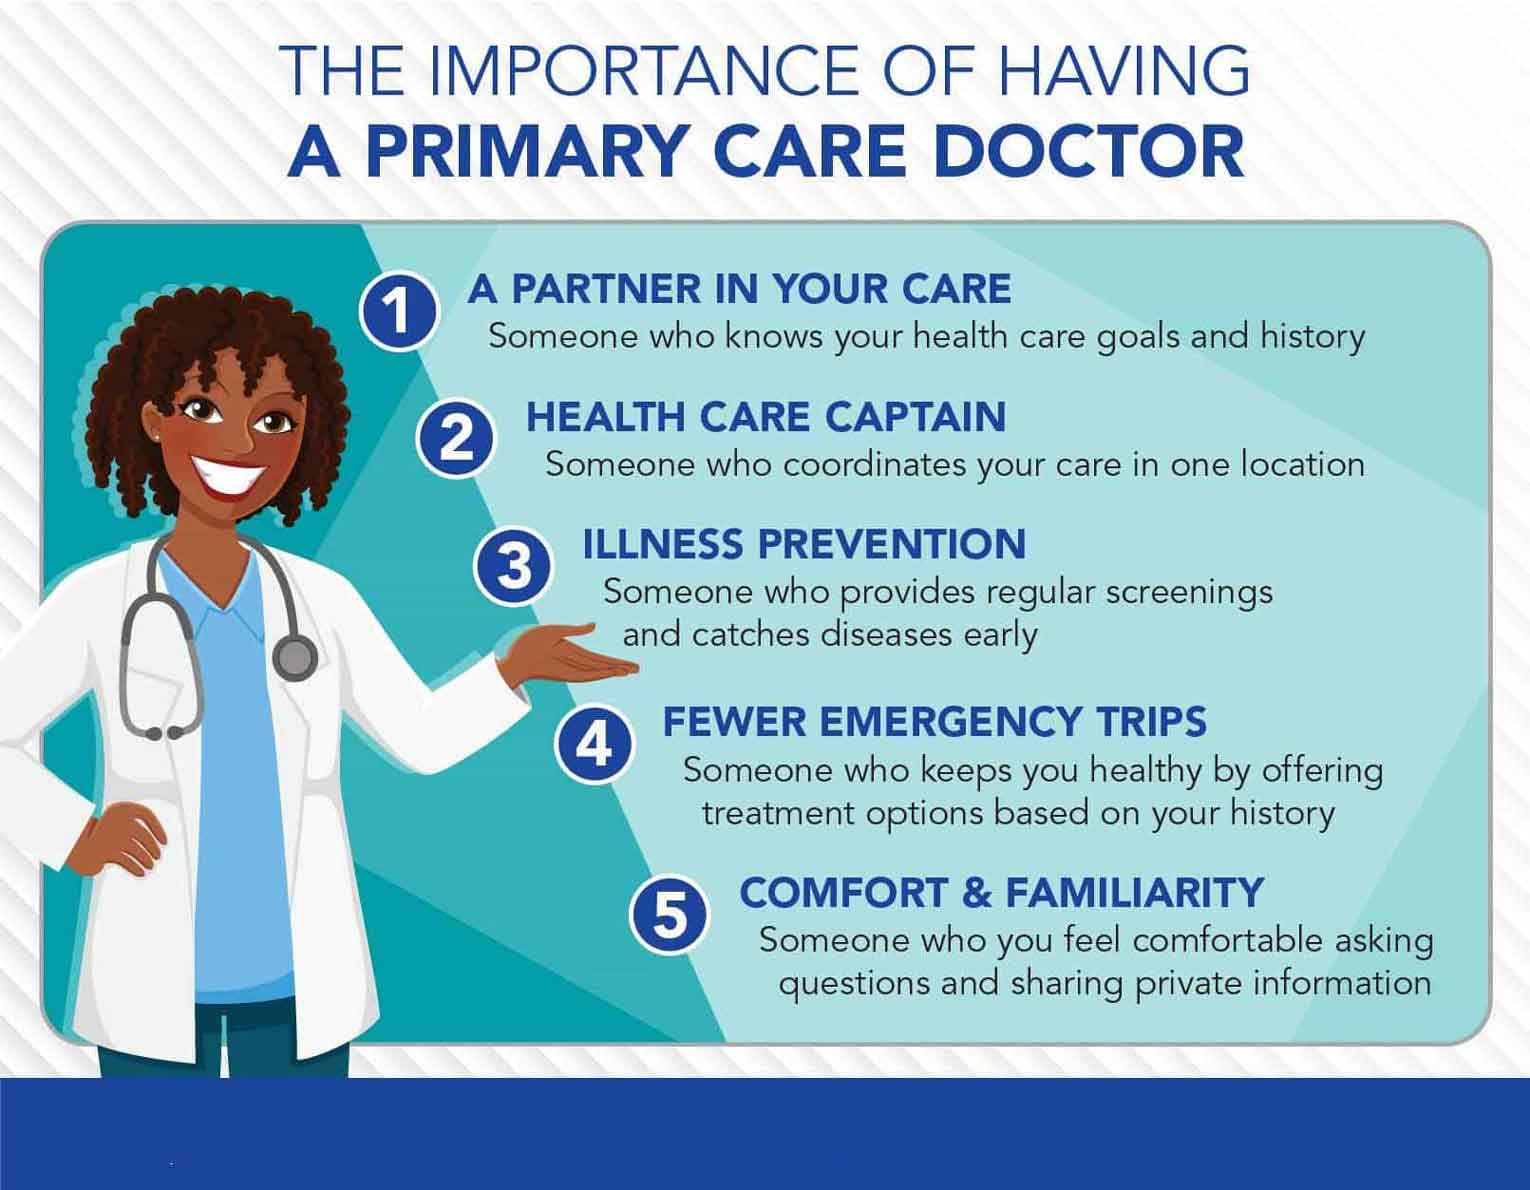 mportance of Primary Care Doctor